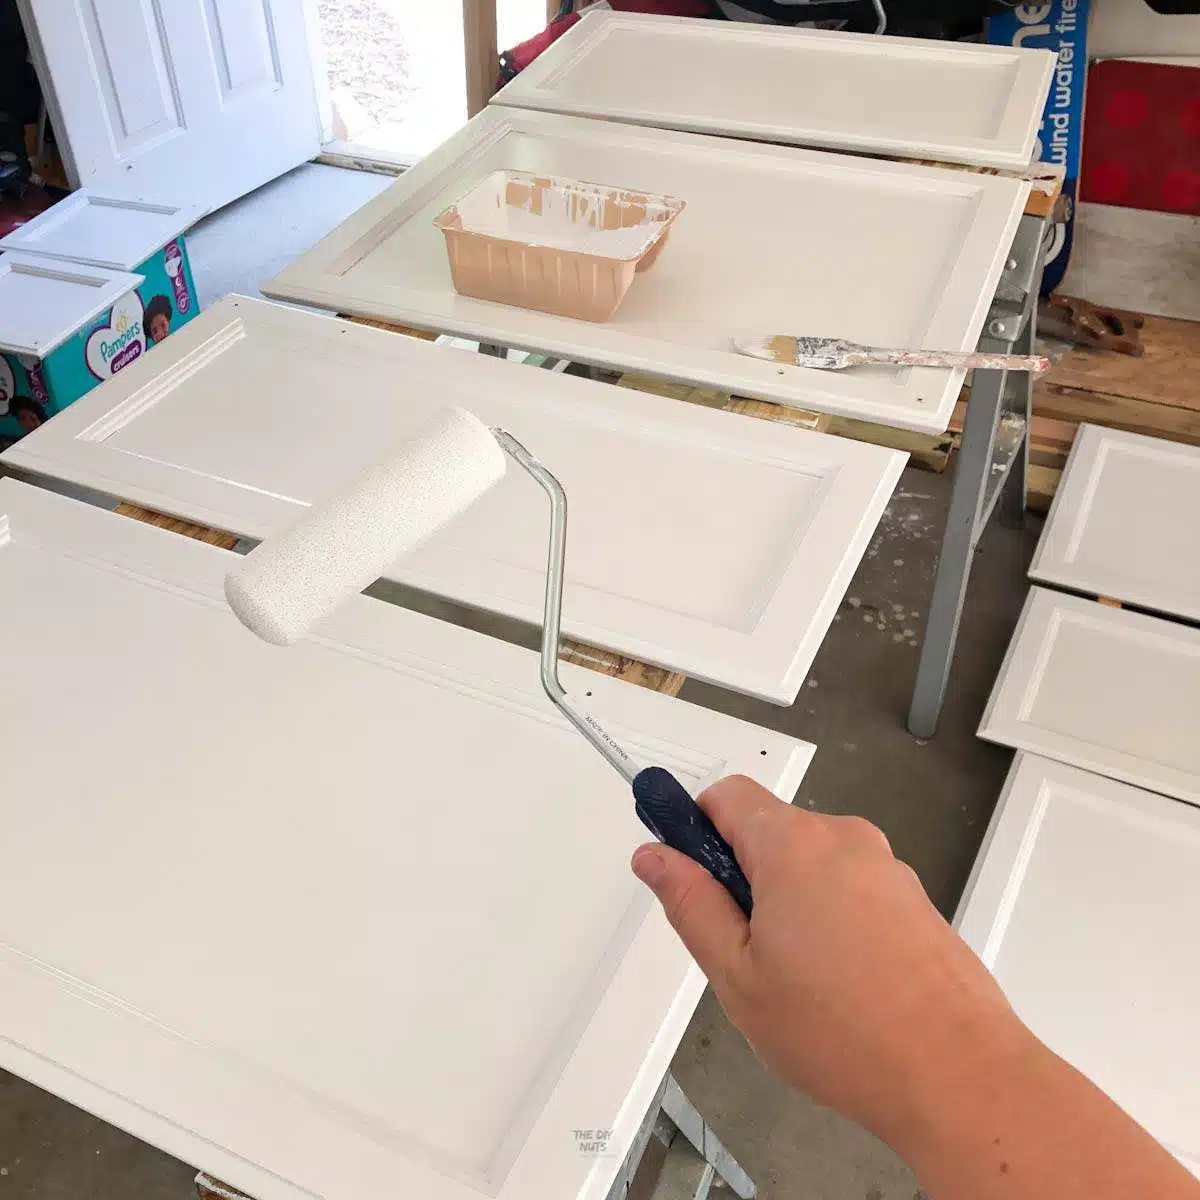 hand holding small roller and cabinet doors on sawhorse being painted white.